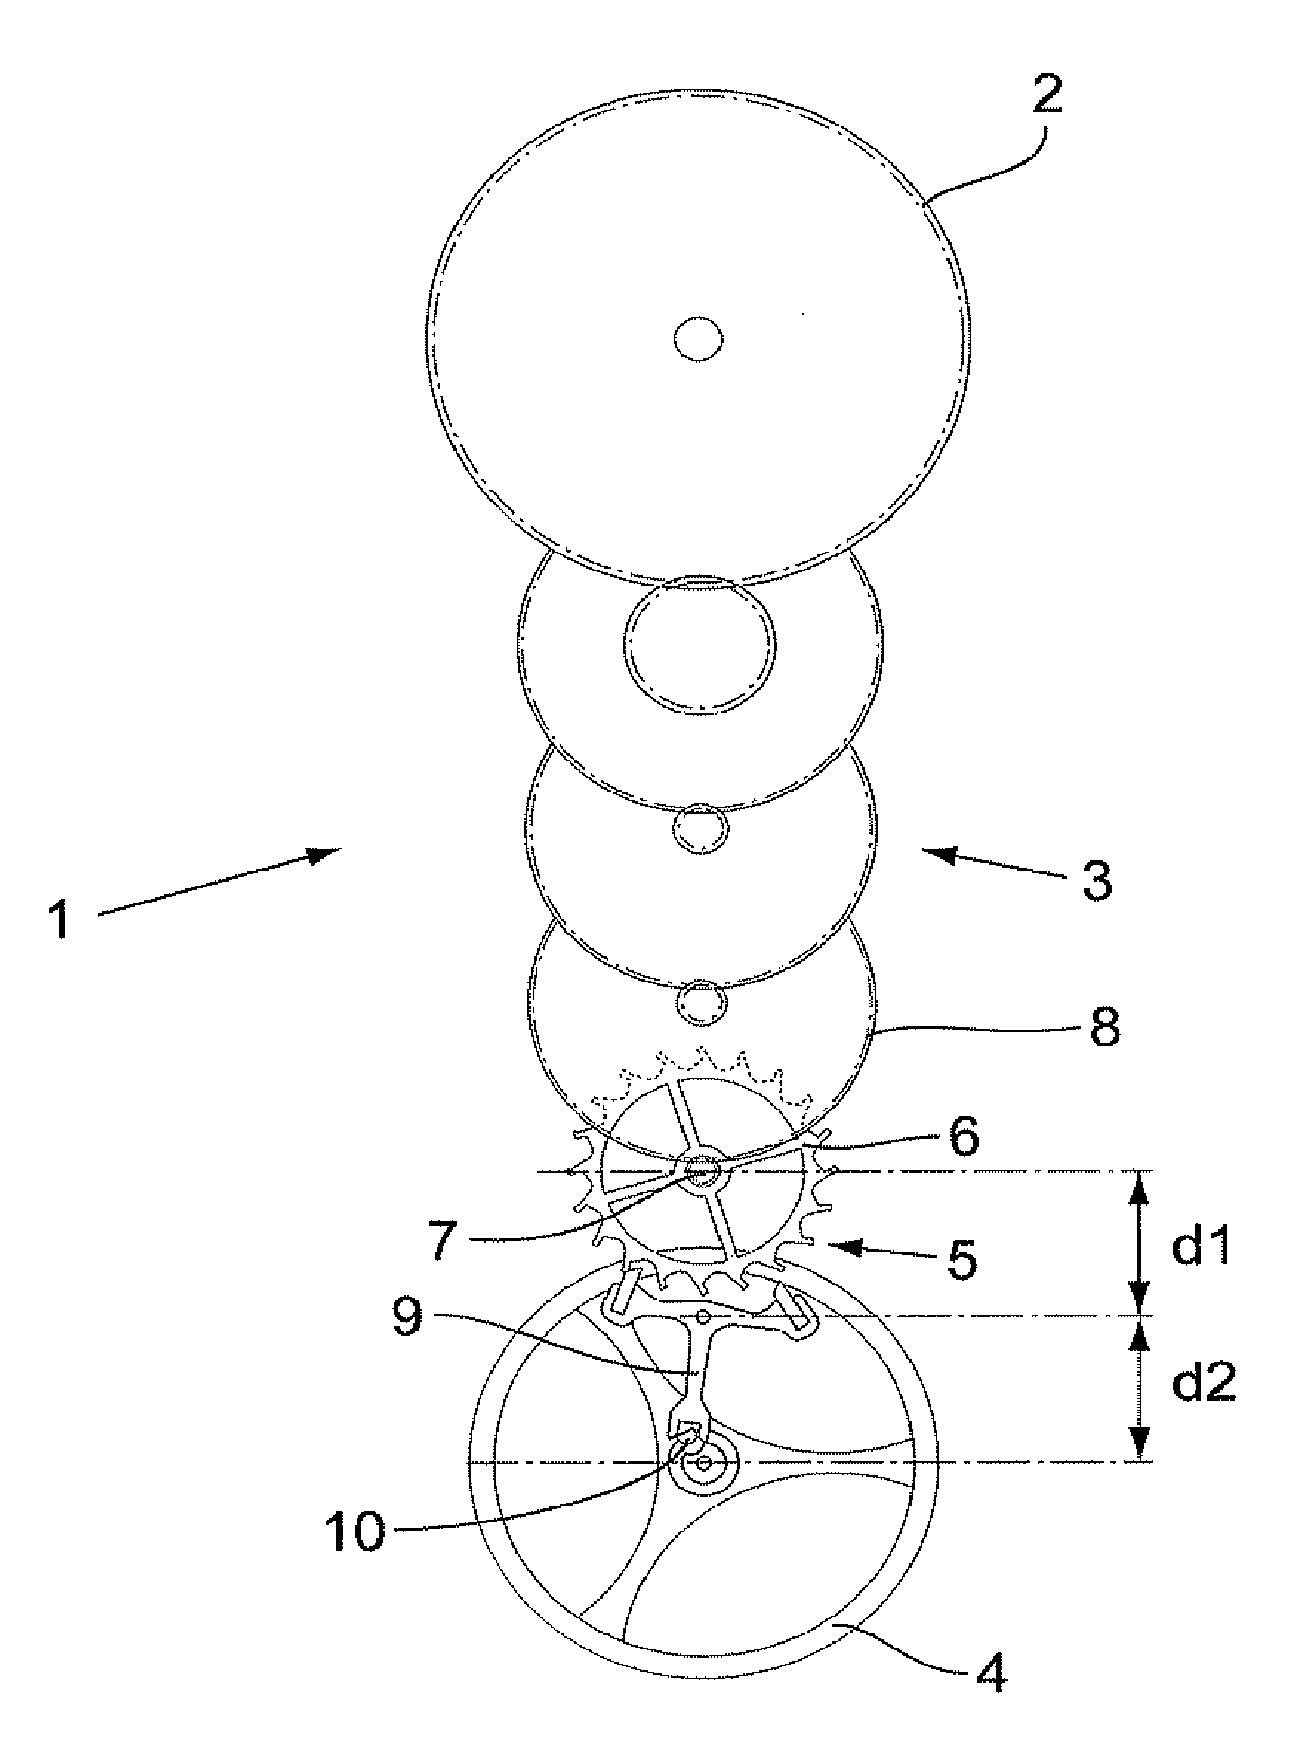 Horological movement comprising a high oscillation frequency regulating device